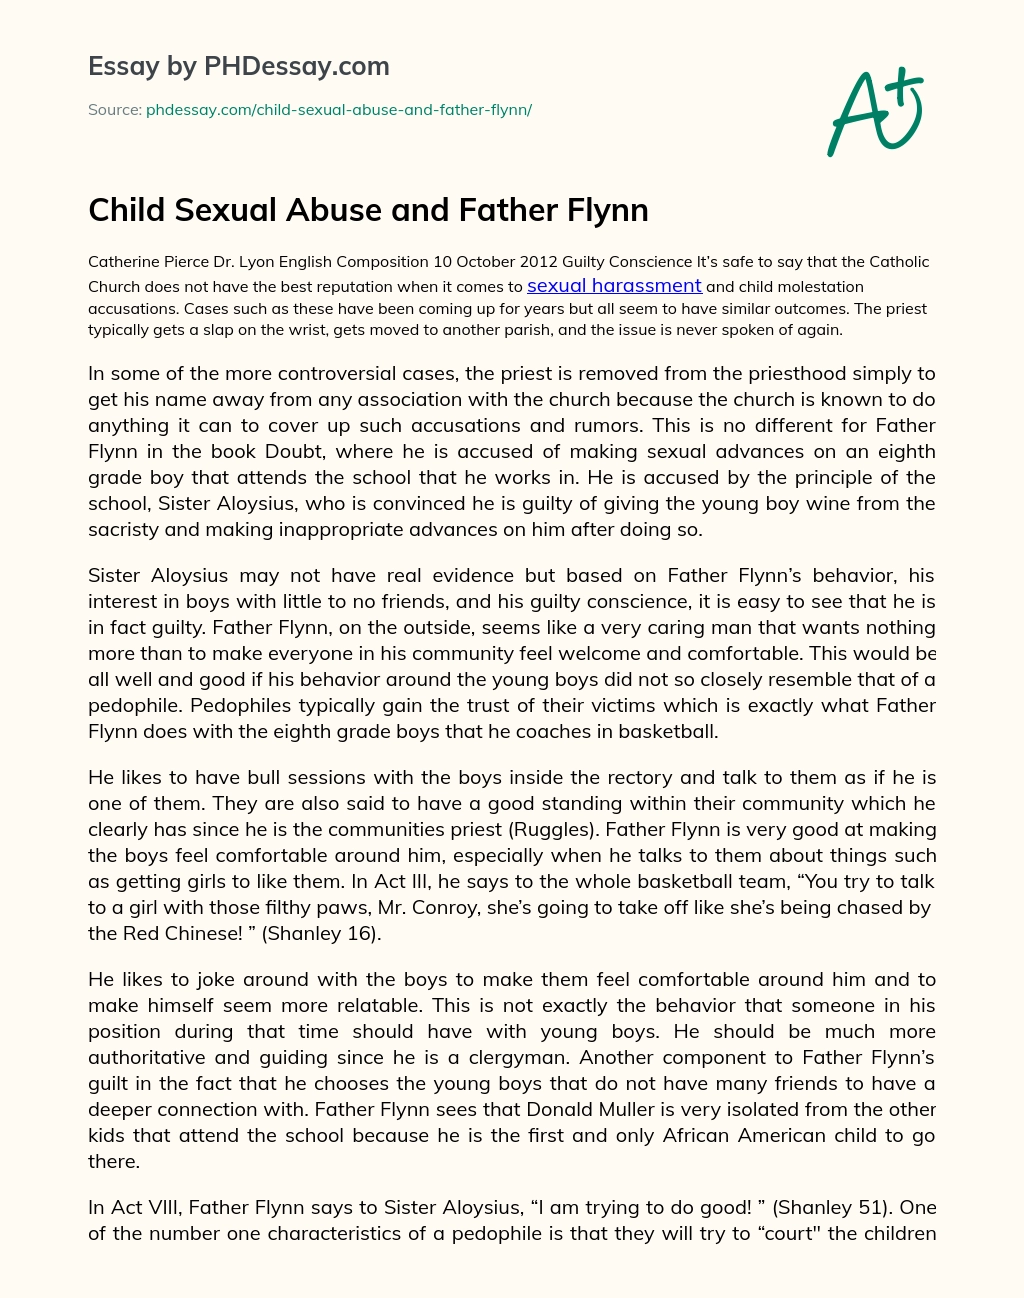 Child Sexual Abuse and Father Flynn essay